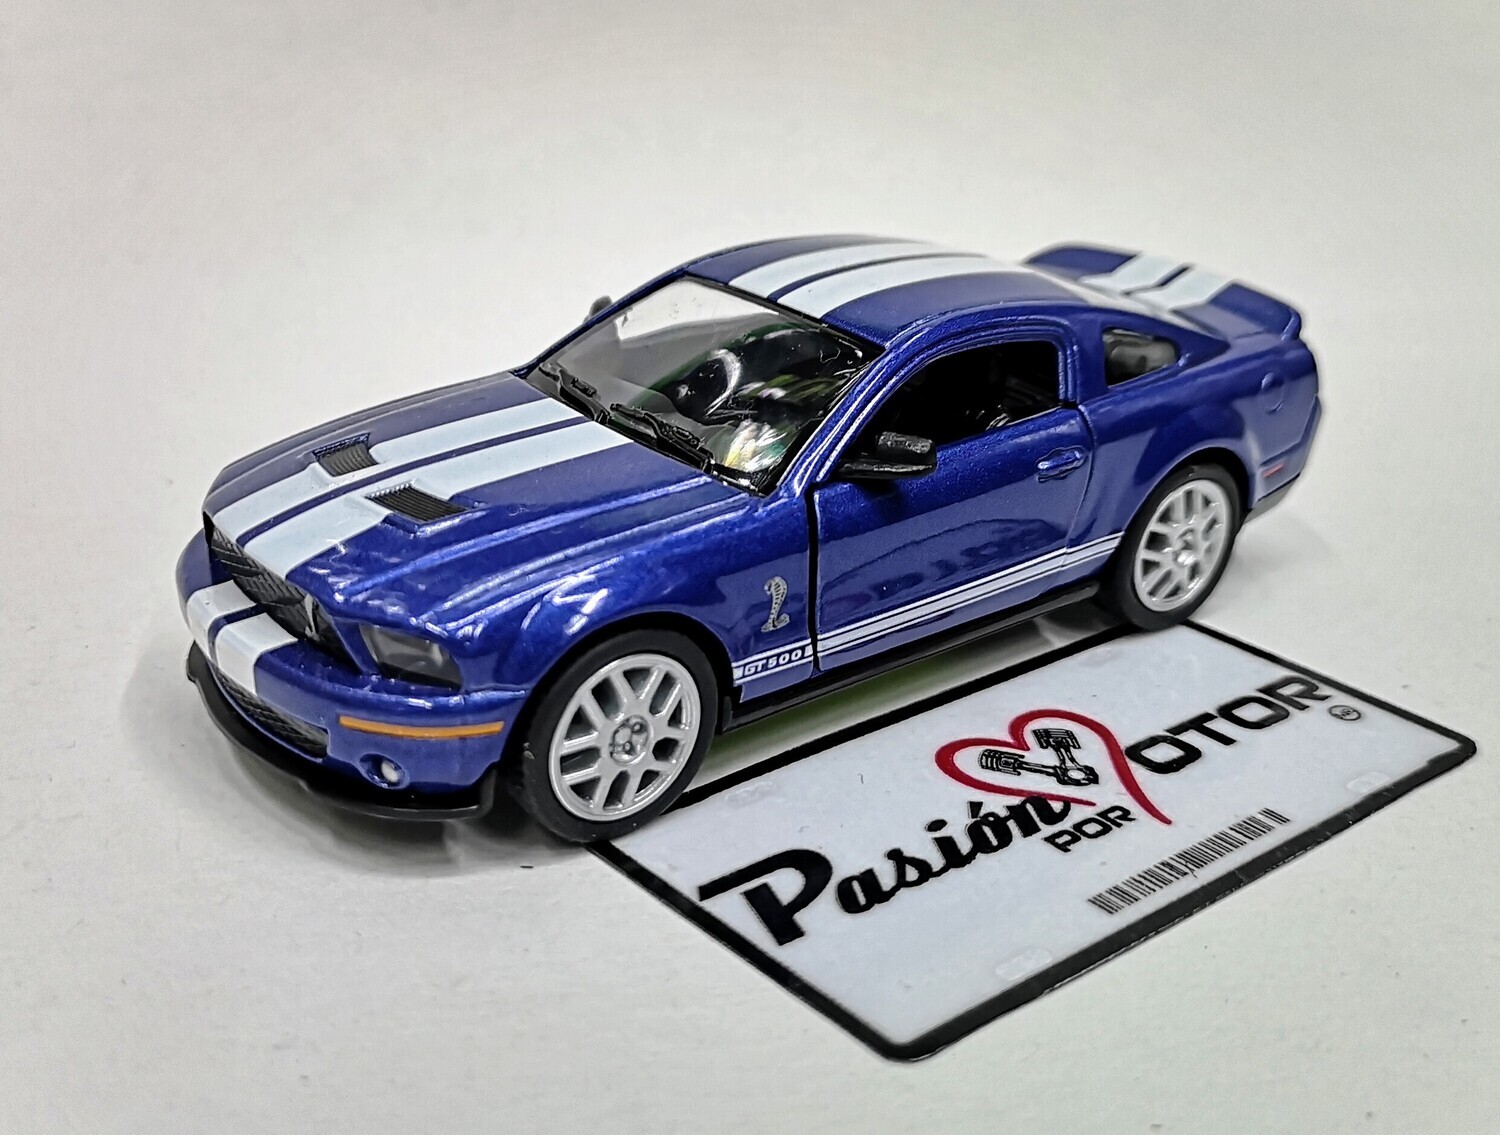 1:38 / 5 Pulgadas Ford Shelby GT500 Coupe 2007 Kinsmart En Display a Granel 1:32 Mustang